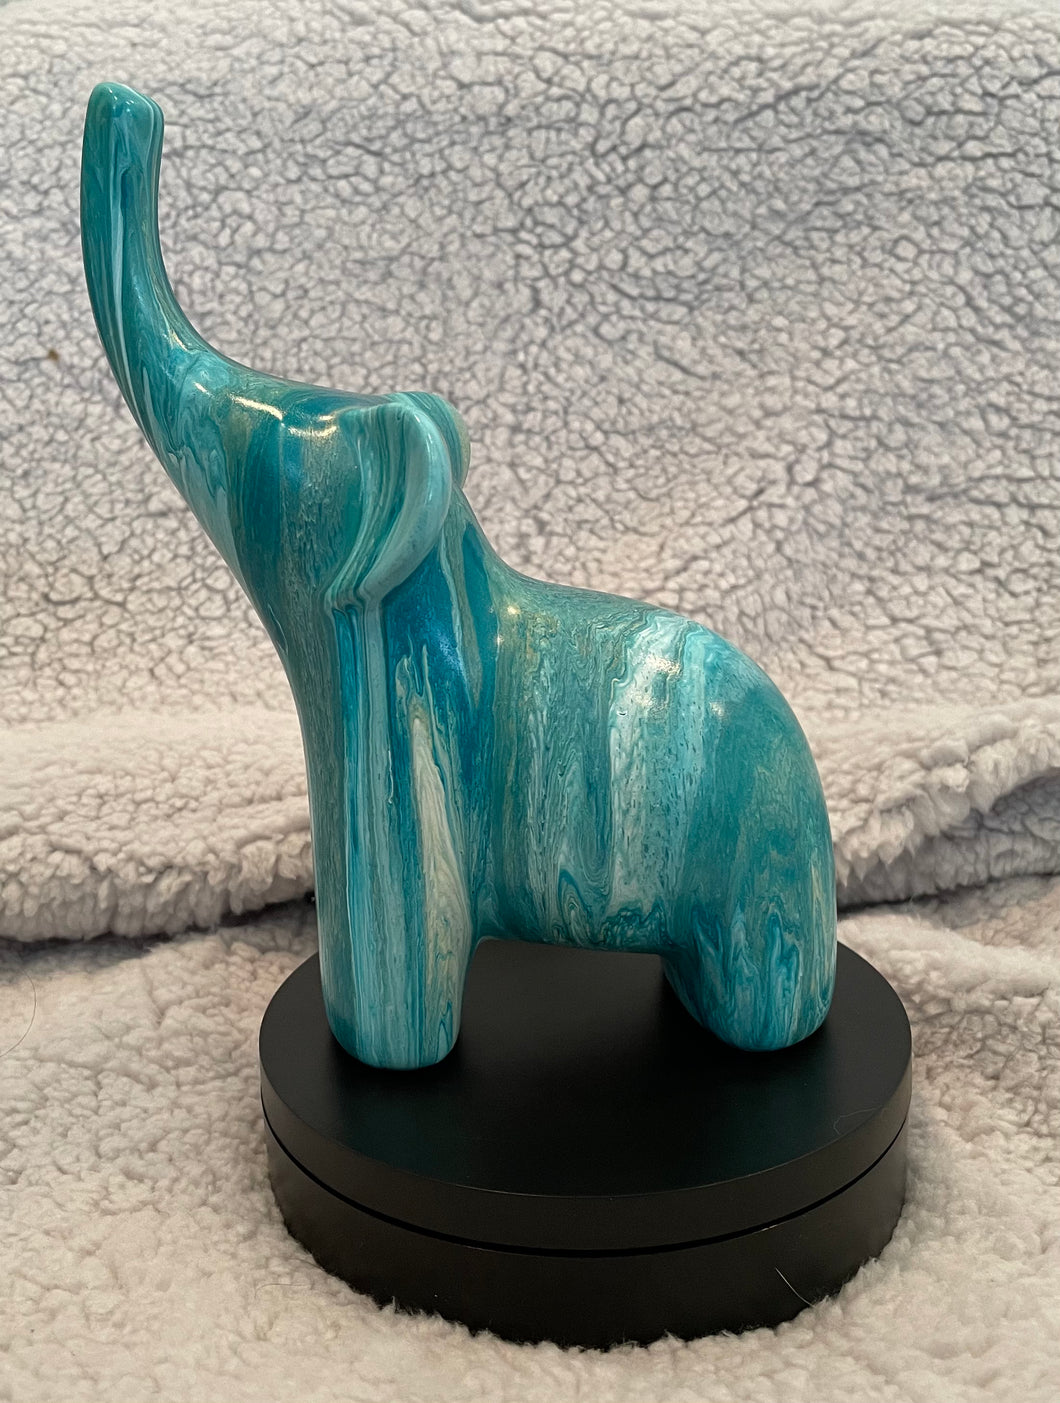 Ceramic Elephant - Teal, White and Metallic Gold - 7 1/2” Tall